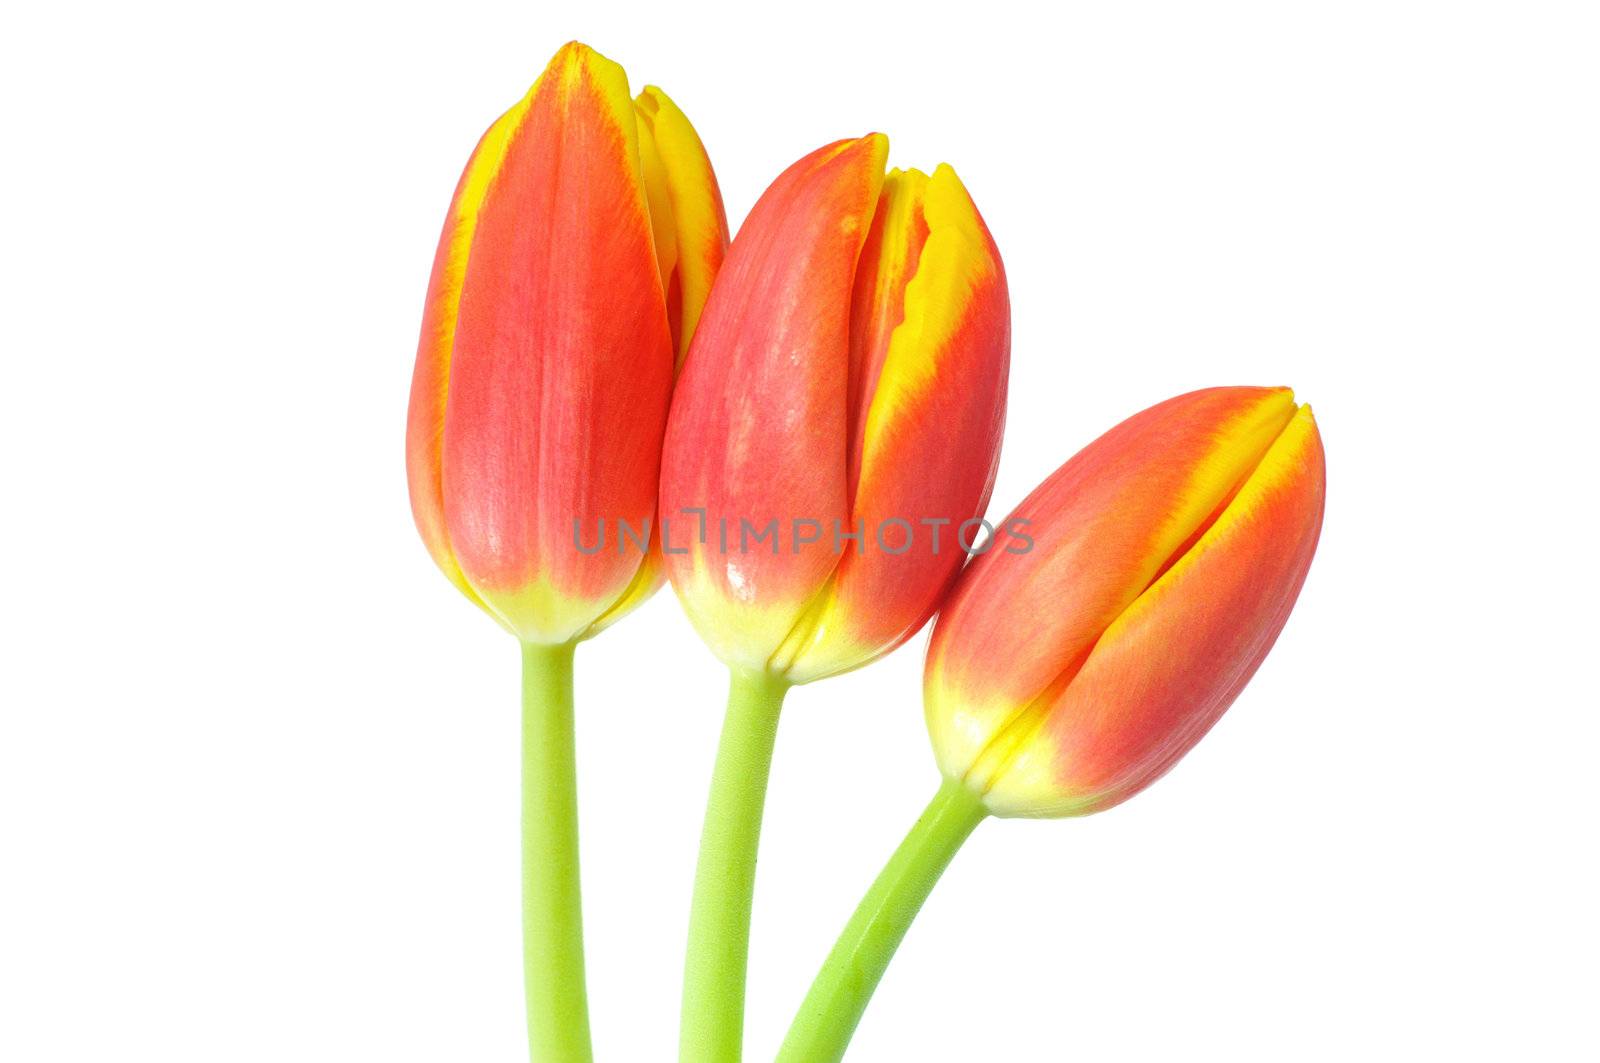 Red and yellow spring tulips arrangement